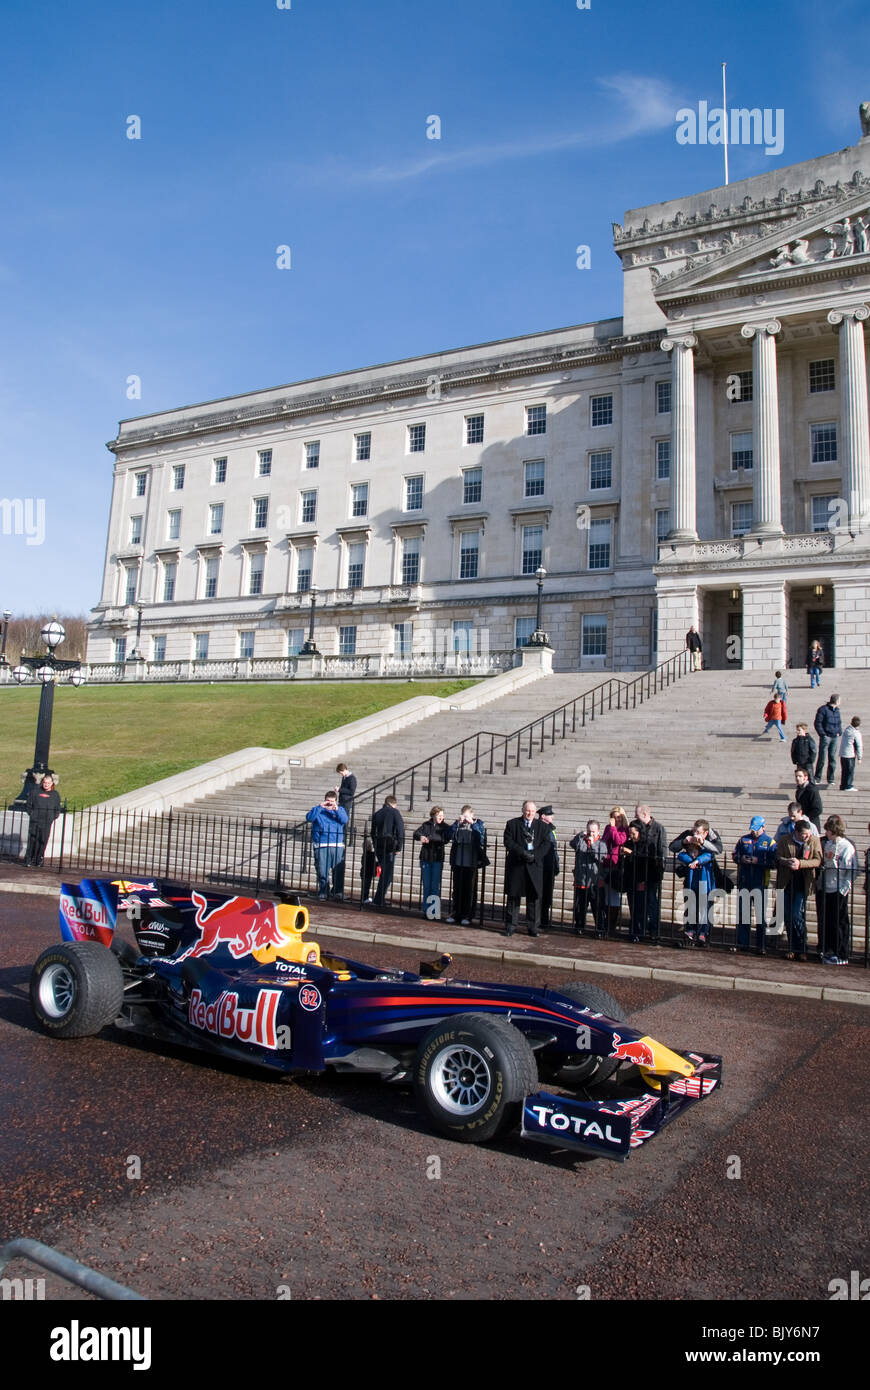 Red Bull Racing Formel1 Auto in Stormont Stockfoto